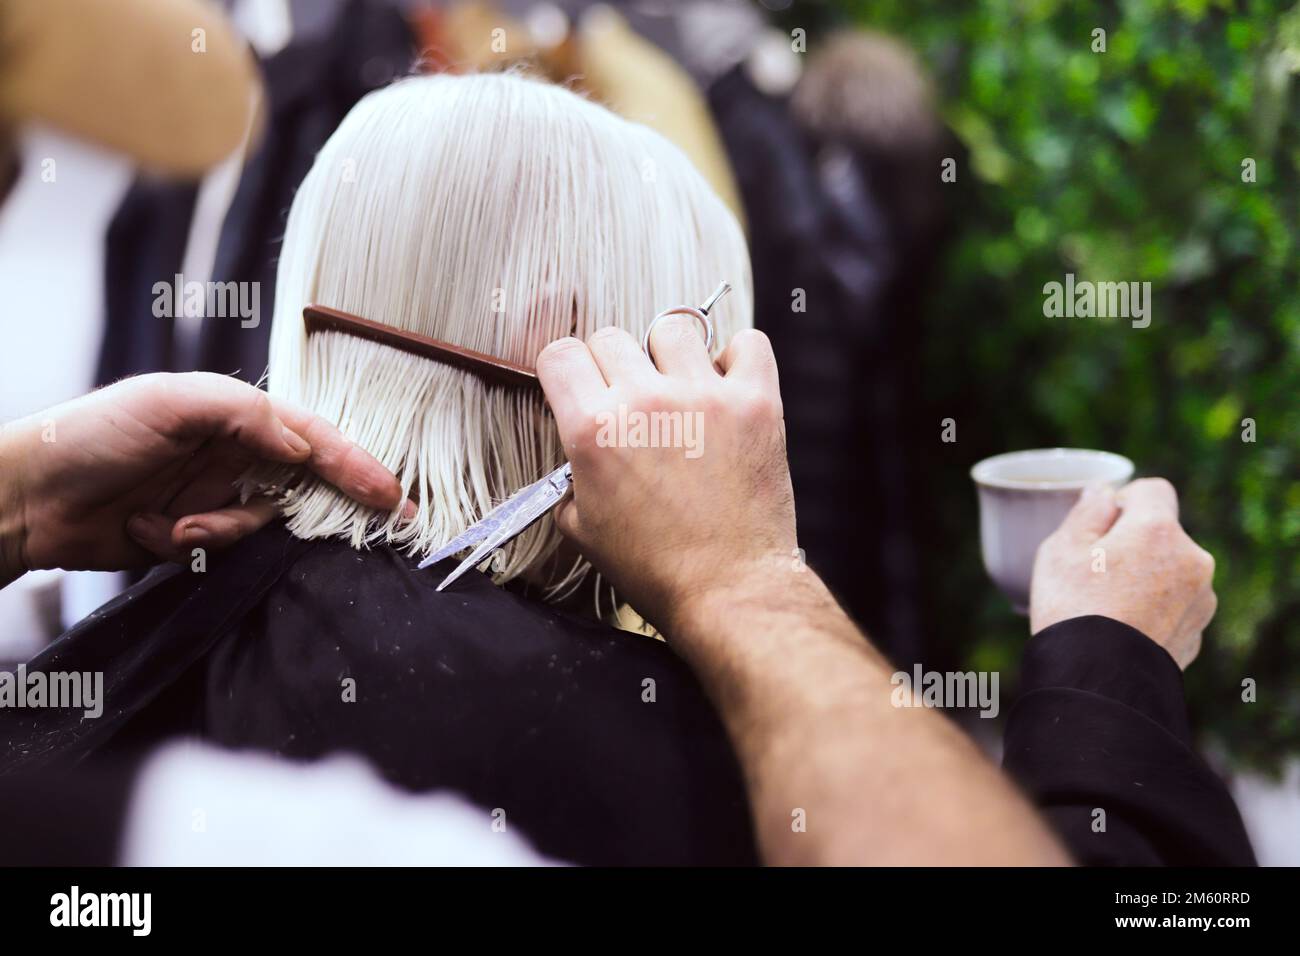 hairdresser's hands with scissors and comb cutting hair of older woman with white hair Stock Photo